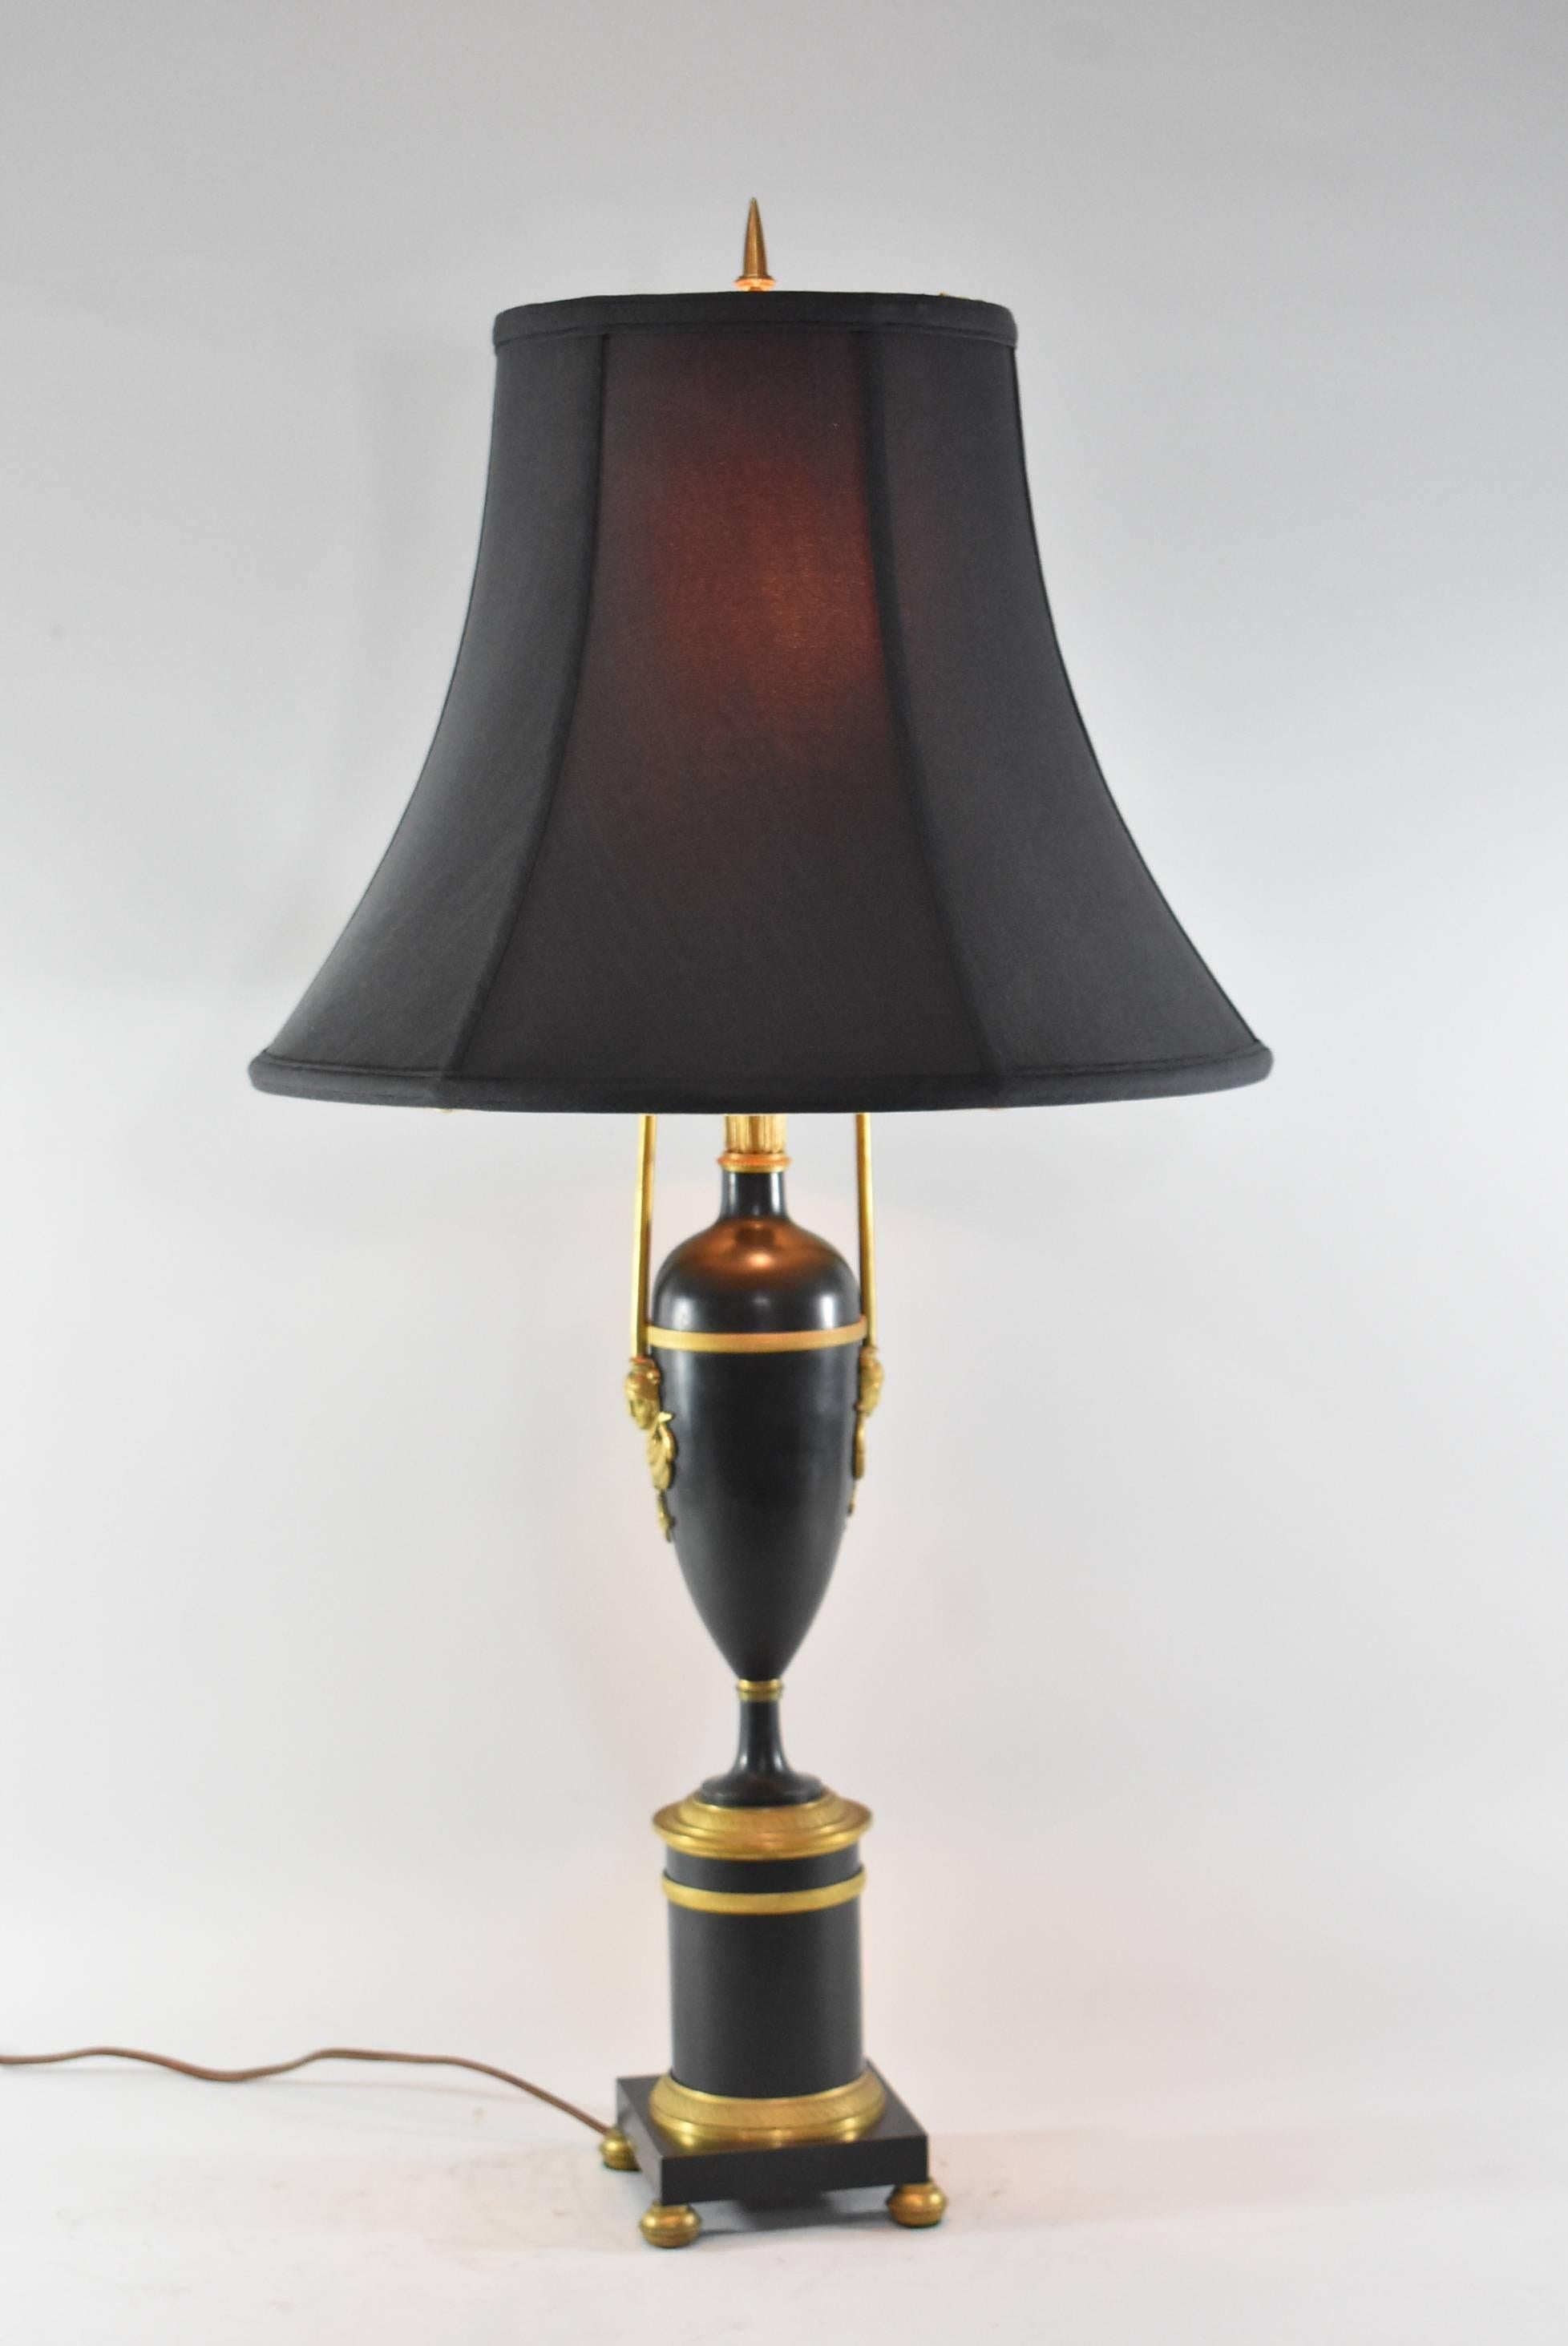 A great French Empire style lamp. Lamp has two sockets with pull chains. Black urn has bronze mounts on side in shape of Egyptian women. The urn sits on a cylindrical base with bronze accents which sits on a square base with four bronze bun feet.